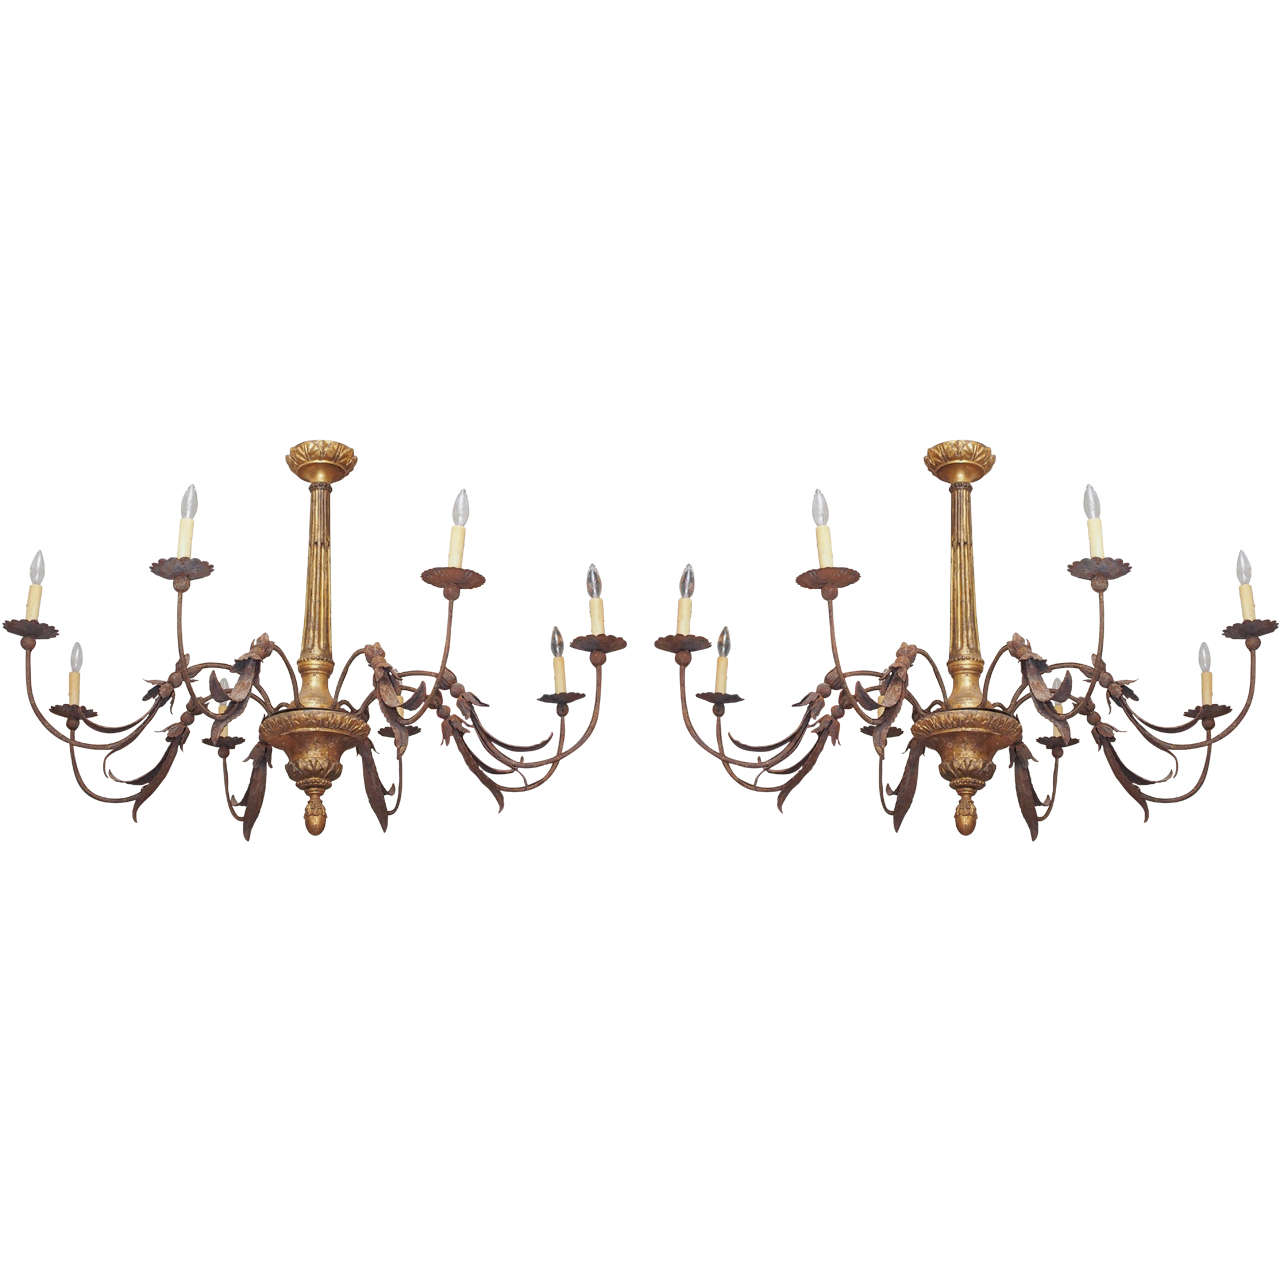 Pair of Tuscan Giltwood and Iron Chandeliers